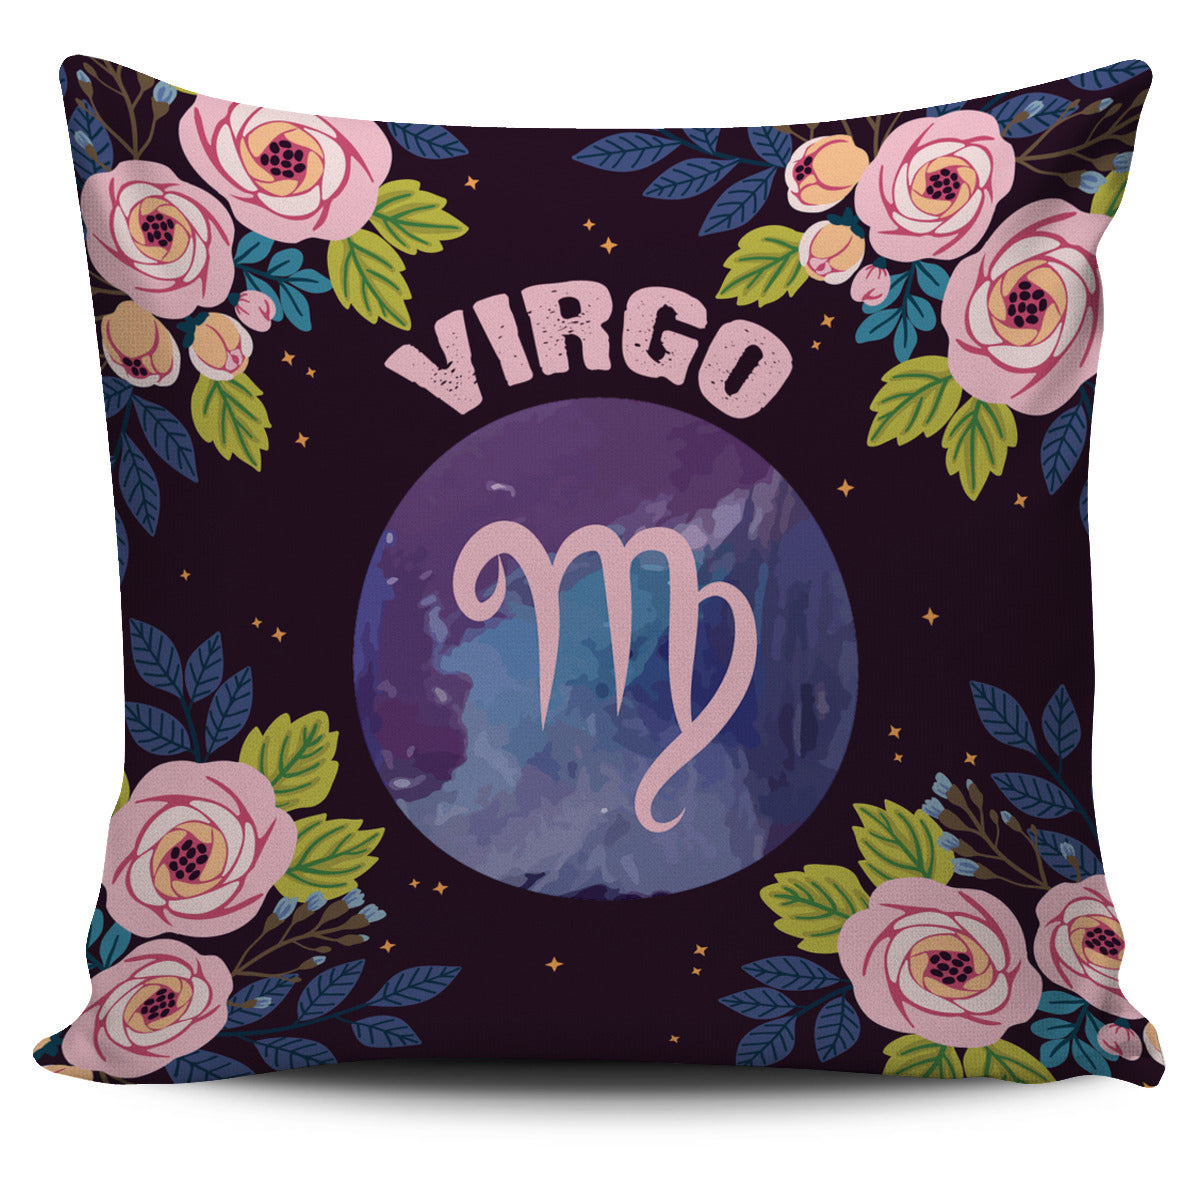 Virgo Vibes Pillow Cover